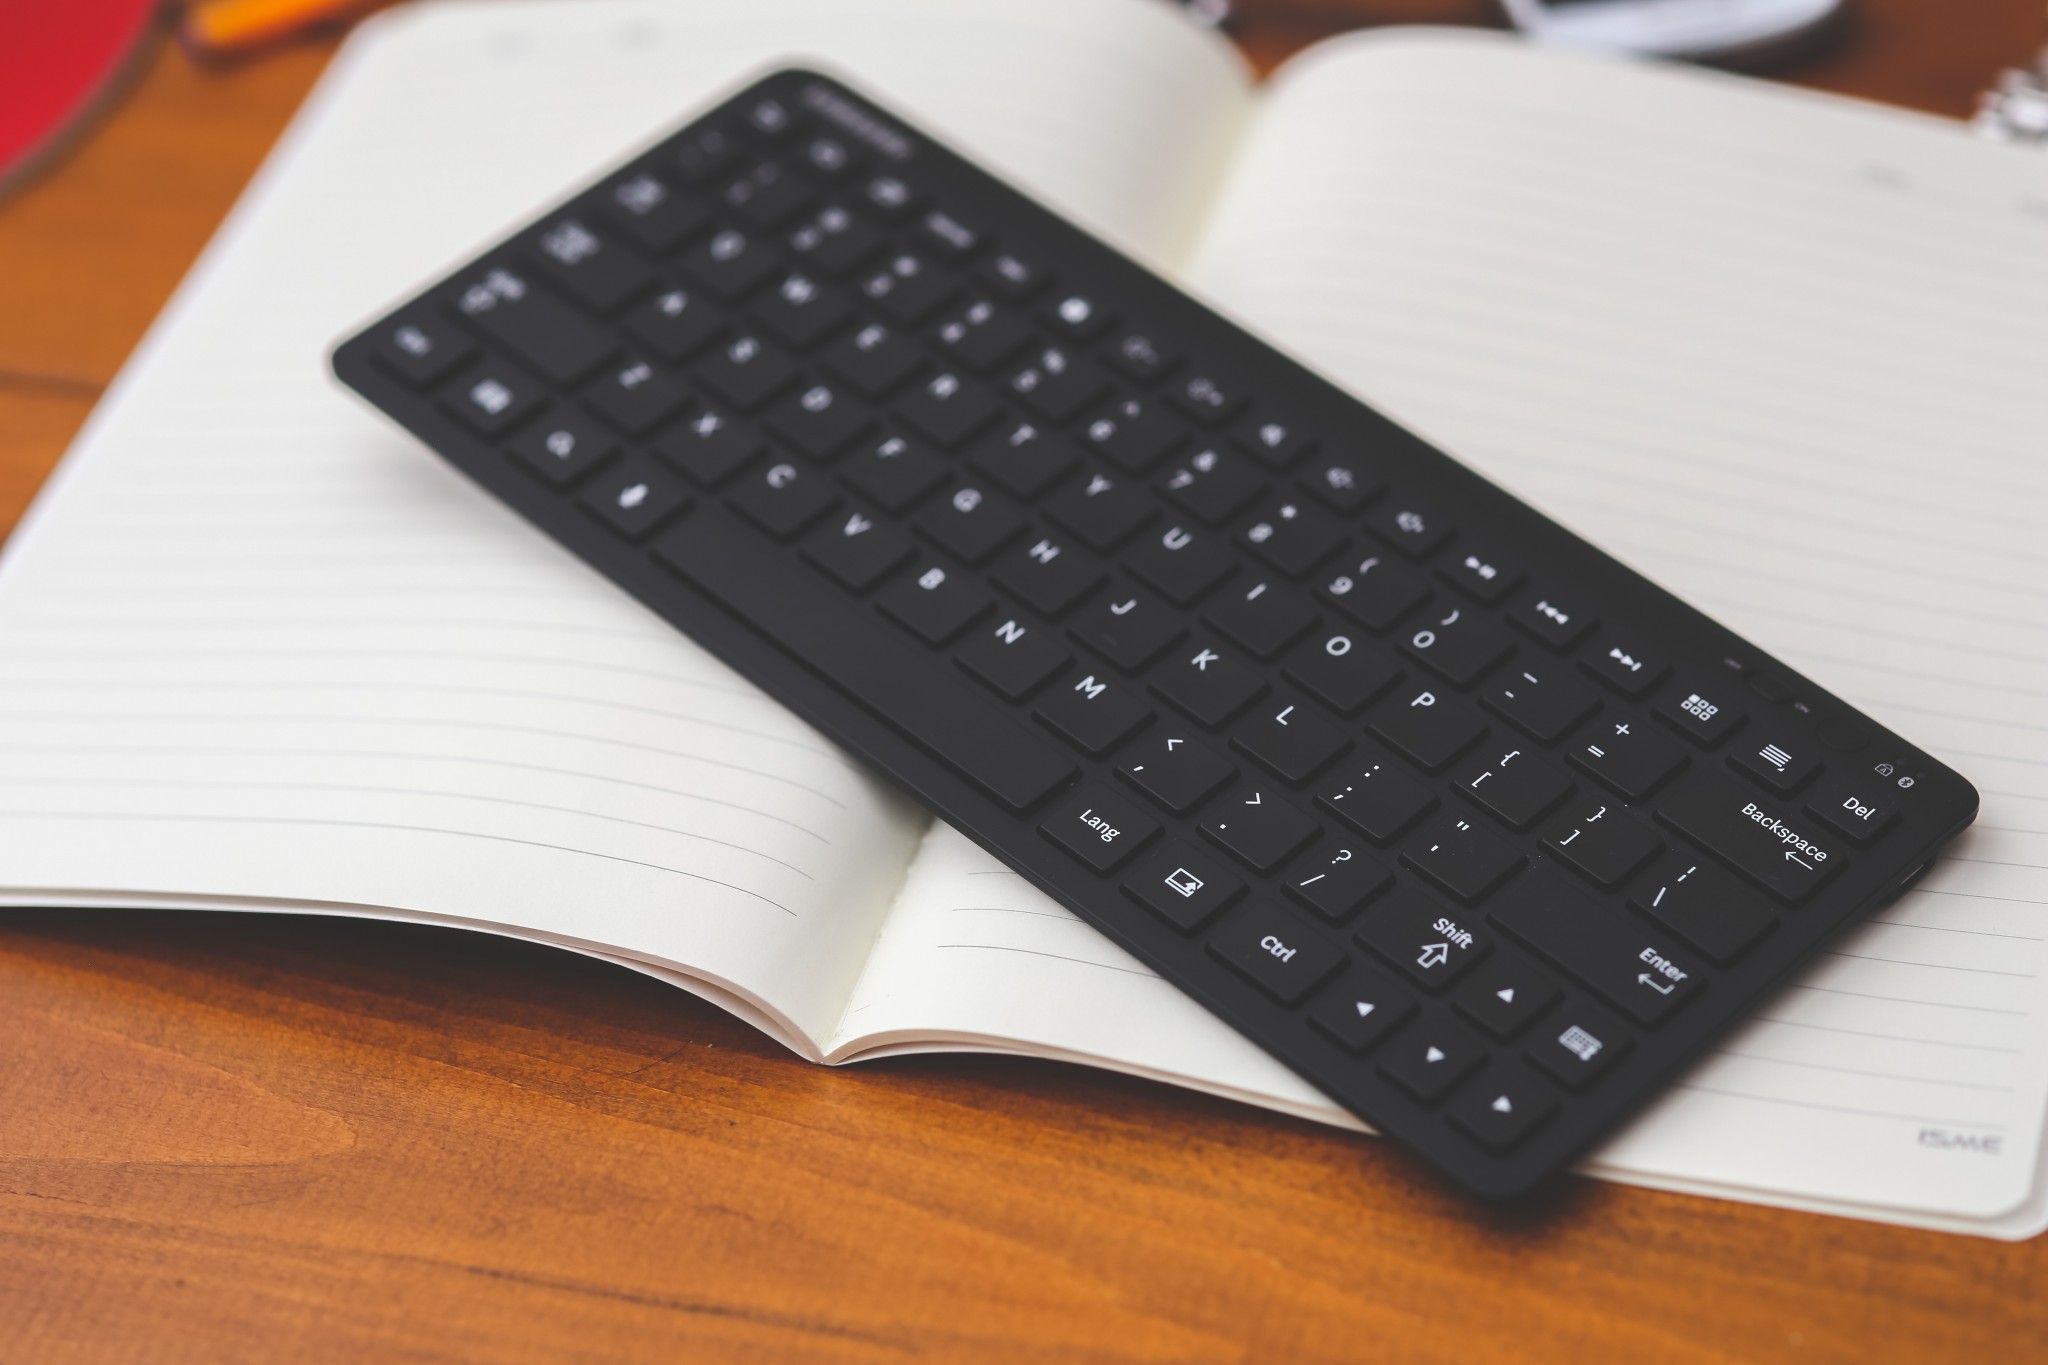 Unencrypted wireless keyboard strokes can be intercepted